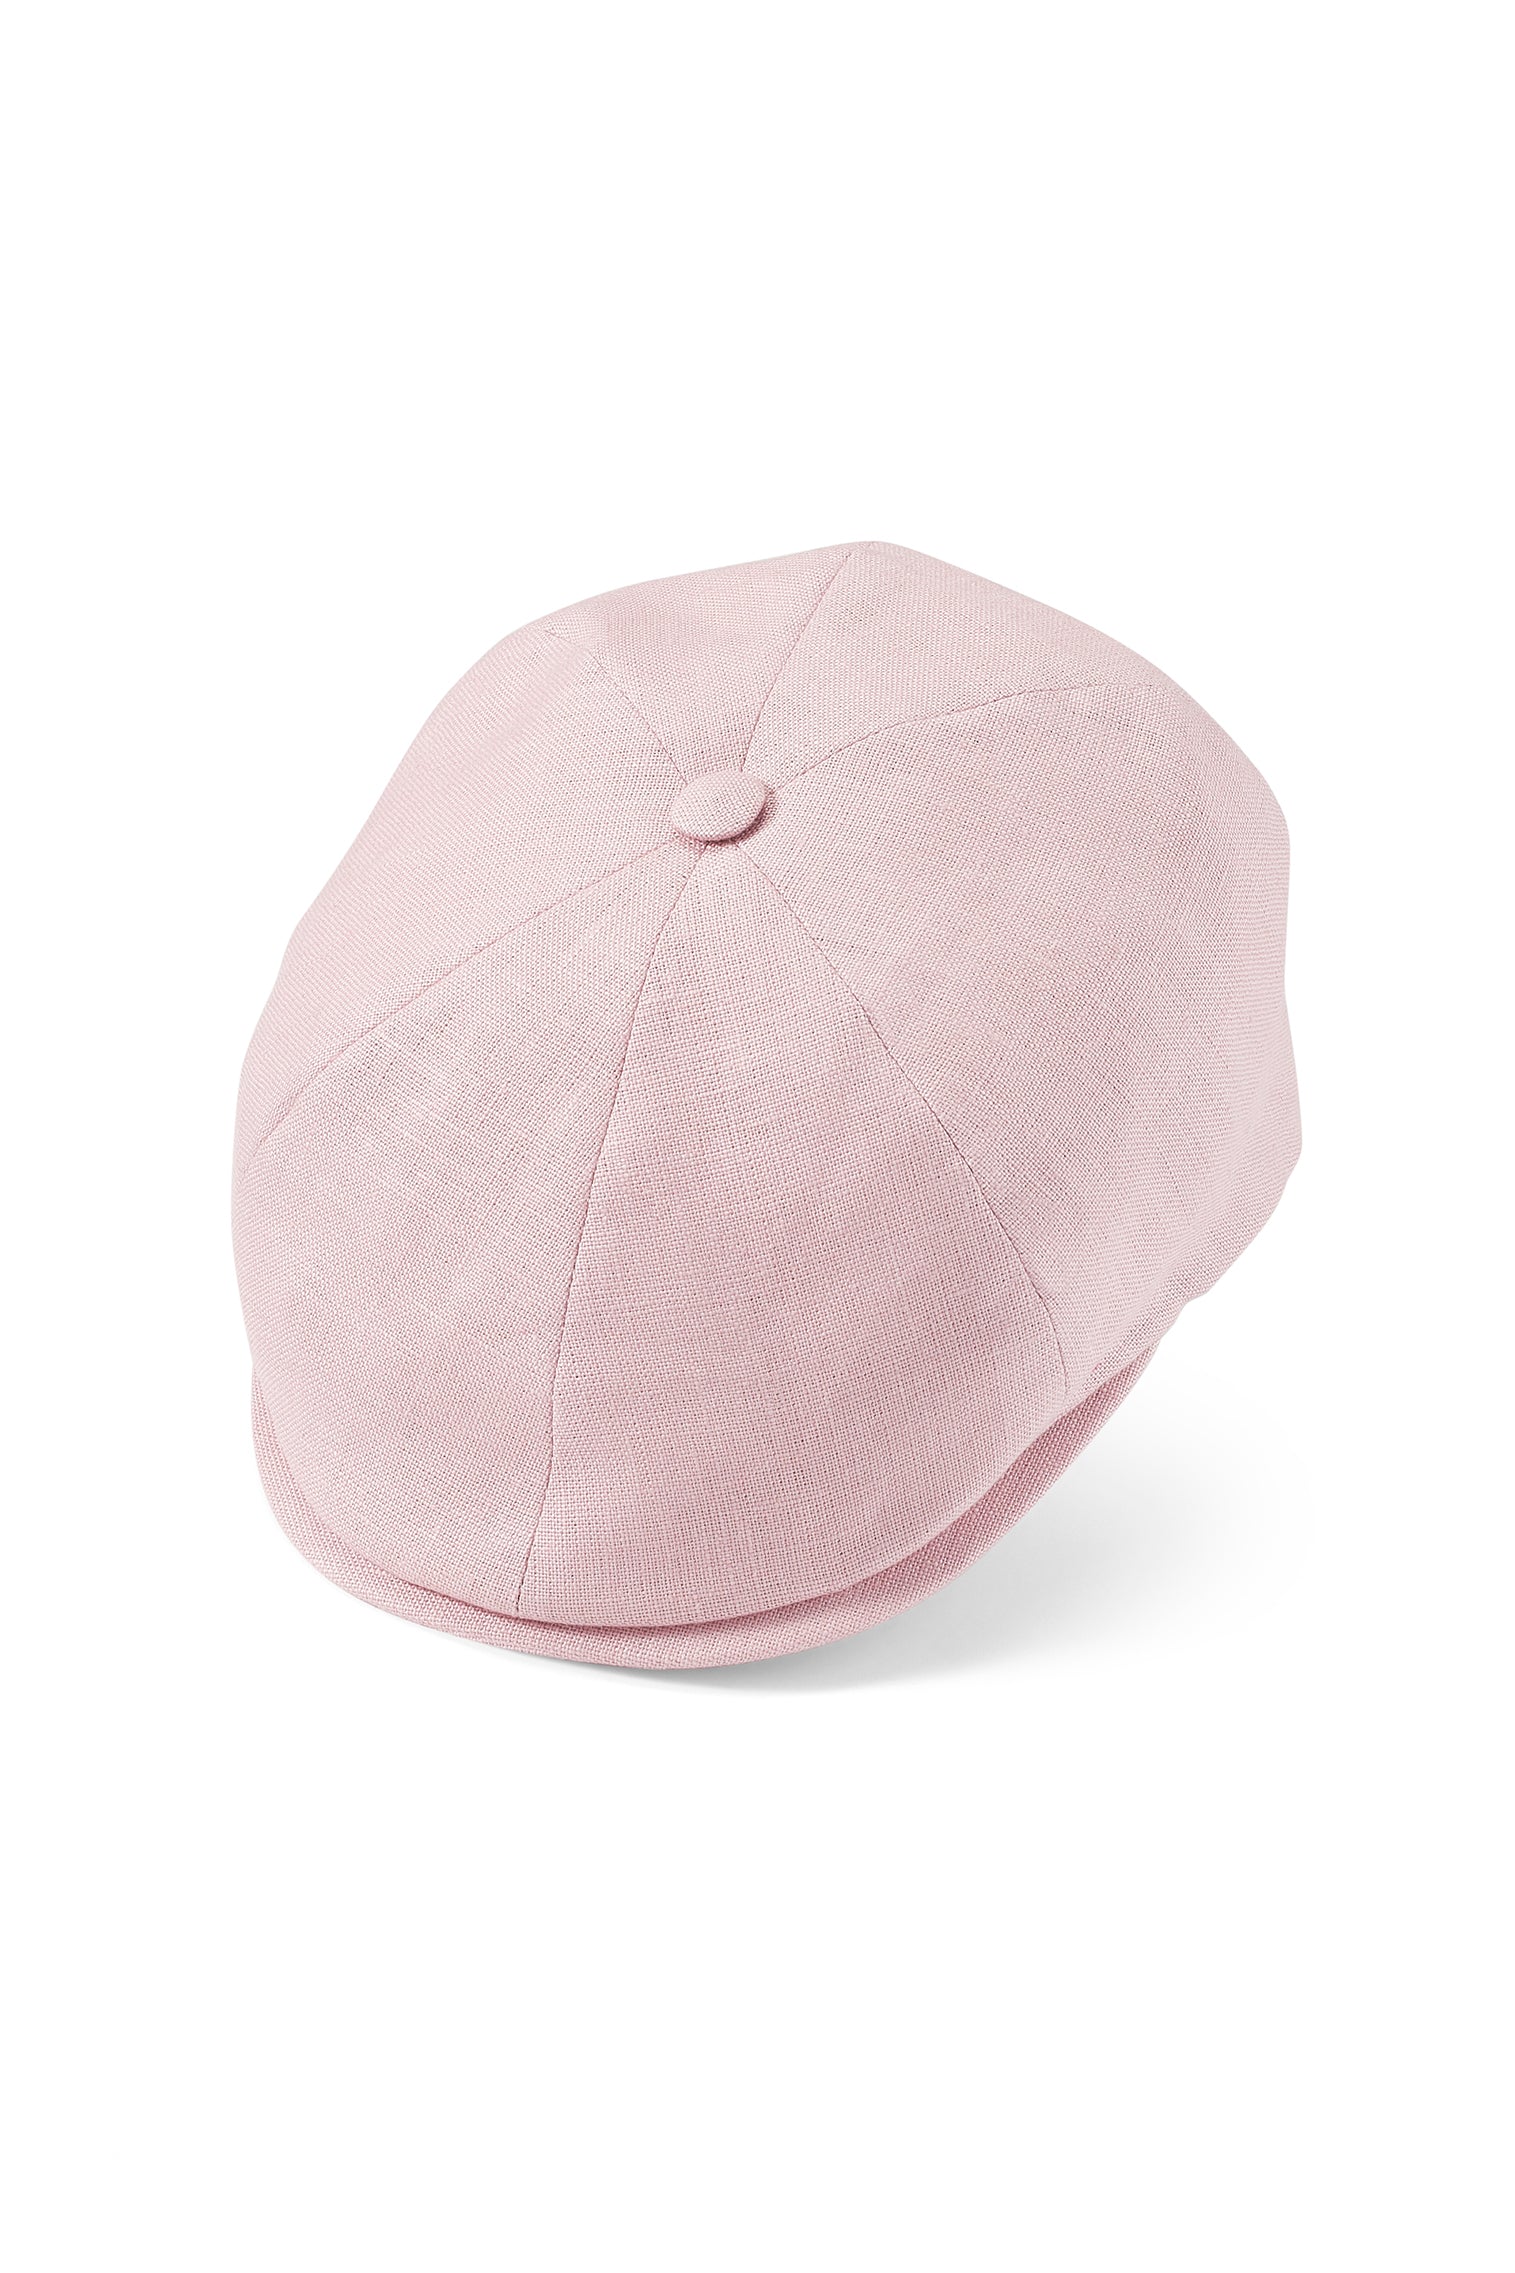 Tahoe Pink Bakerboy Cap - Hats for Tall People - Lock & Co. Hatters London UK